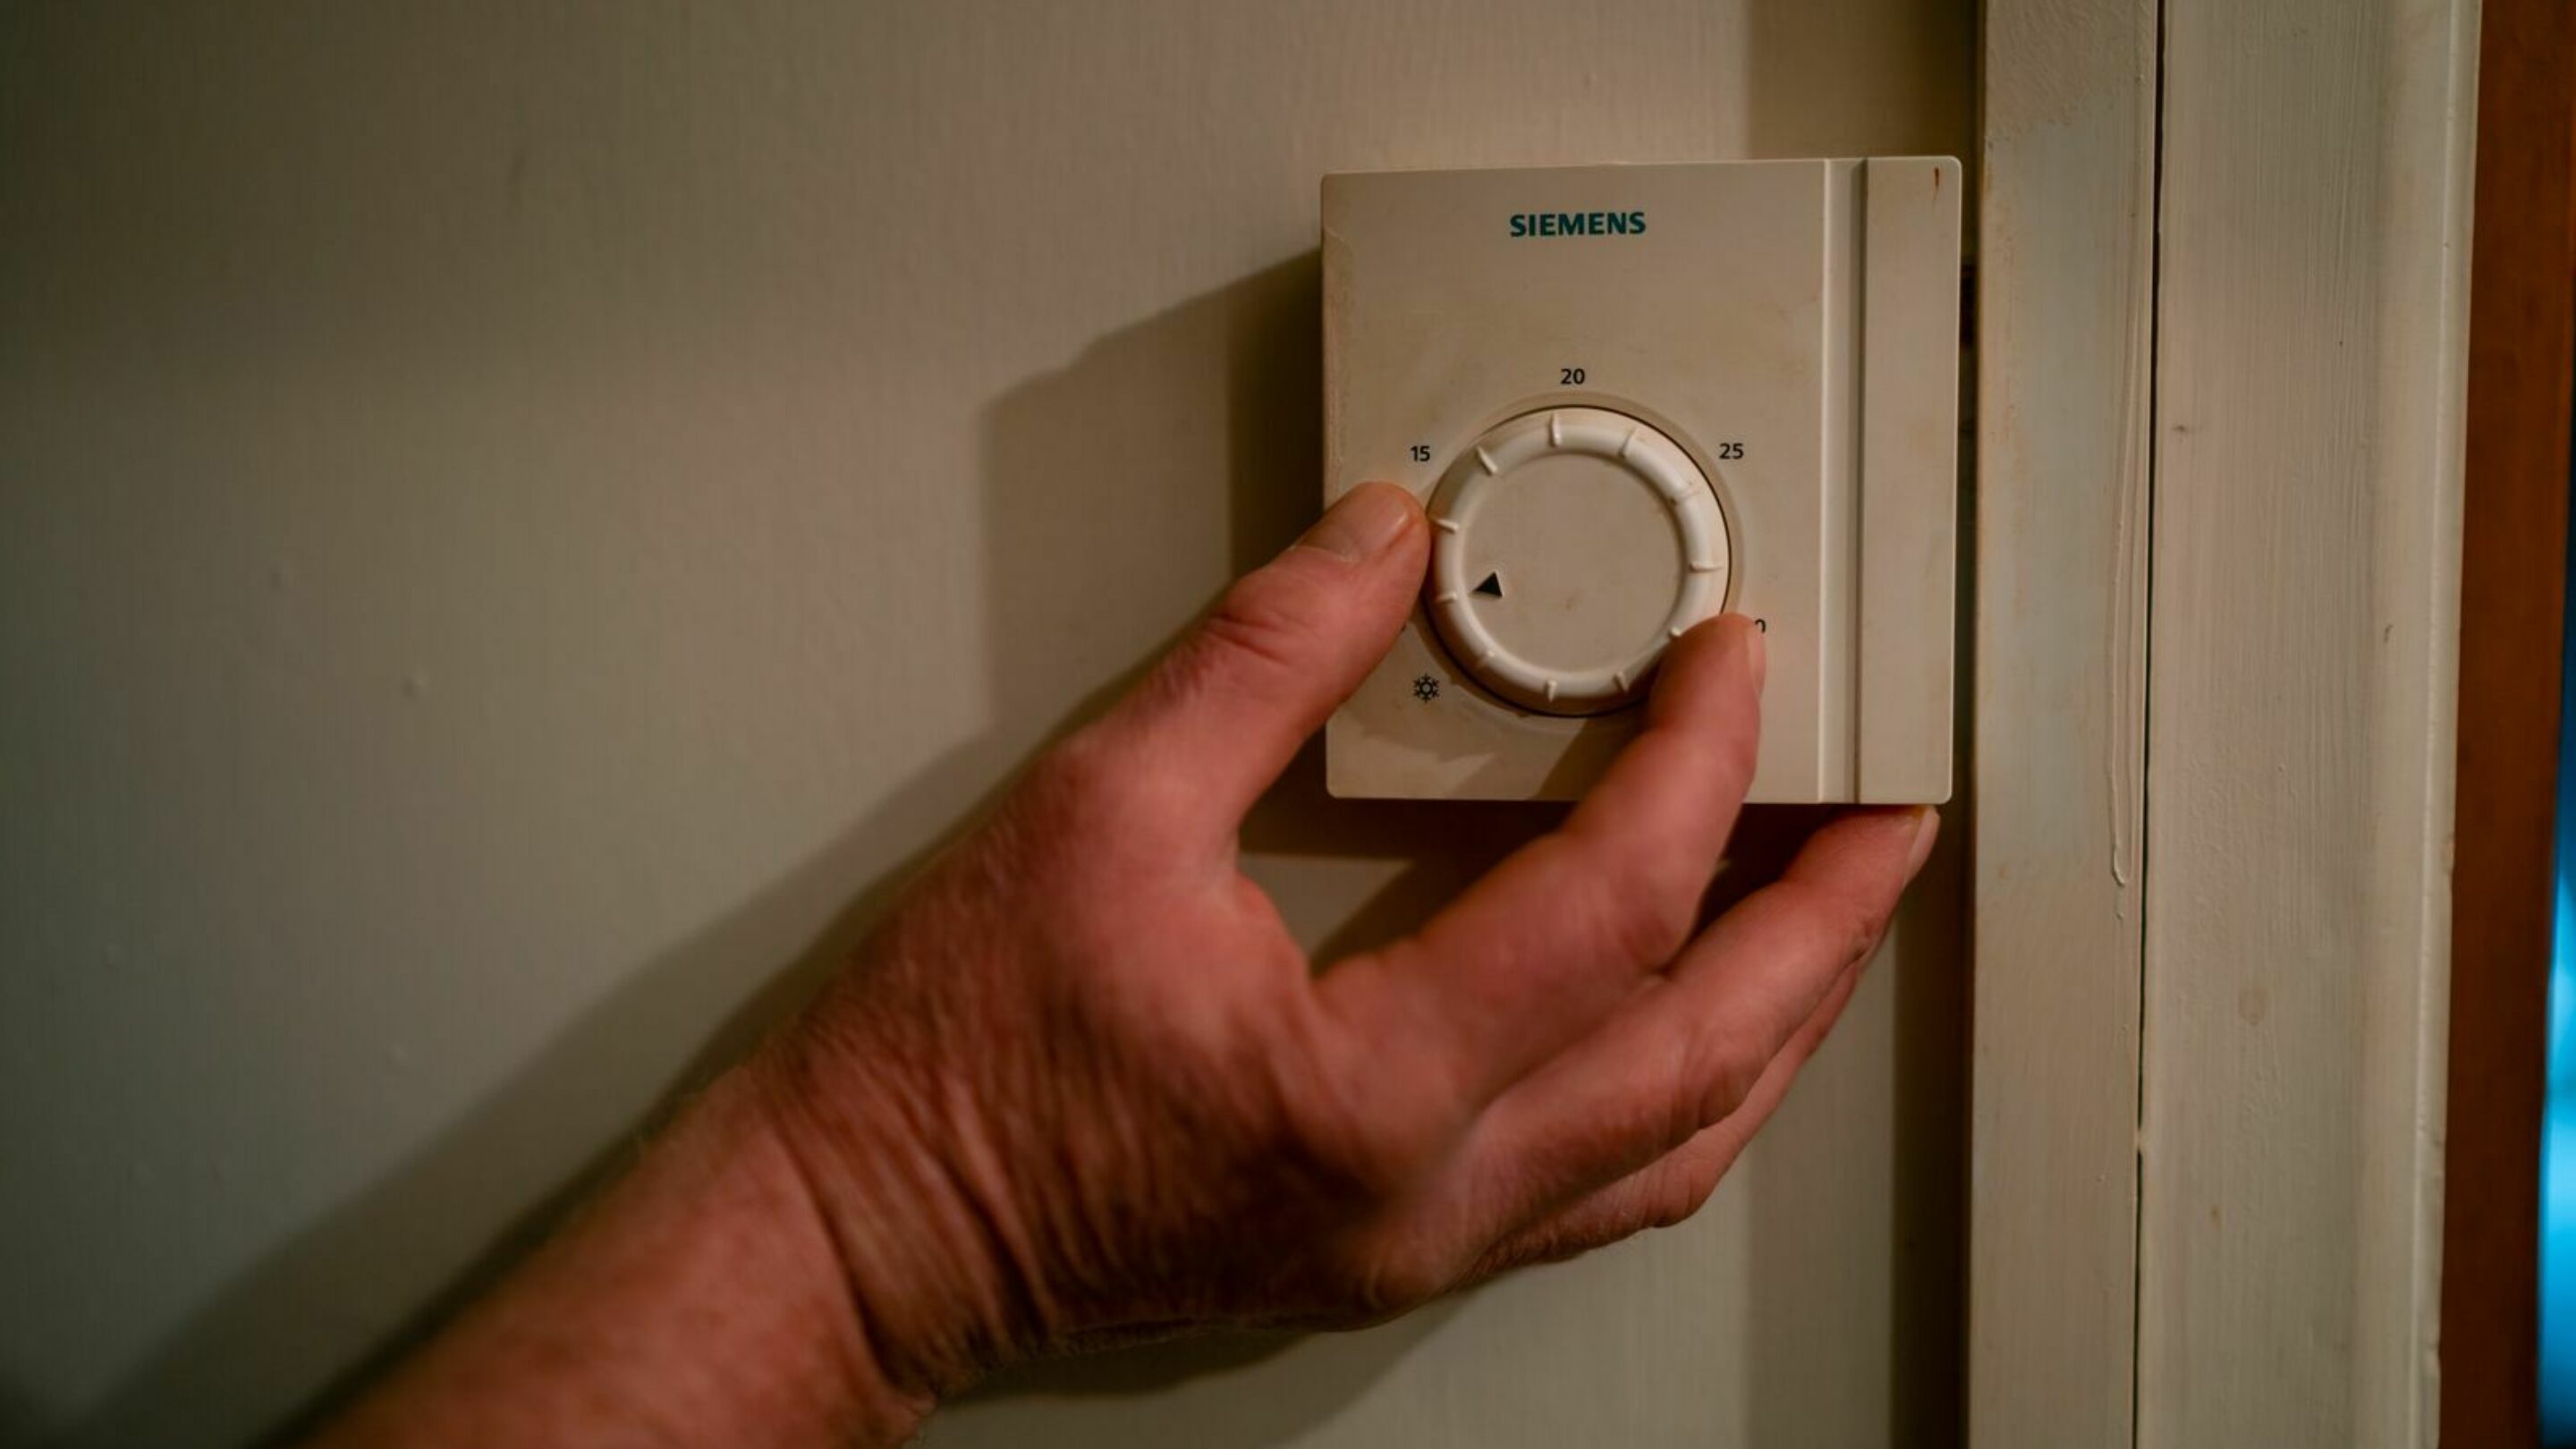 A man's hand adjusting the wall thermostat